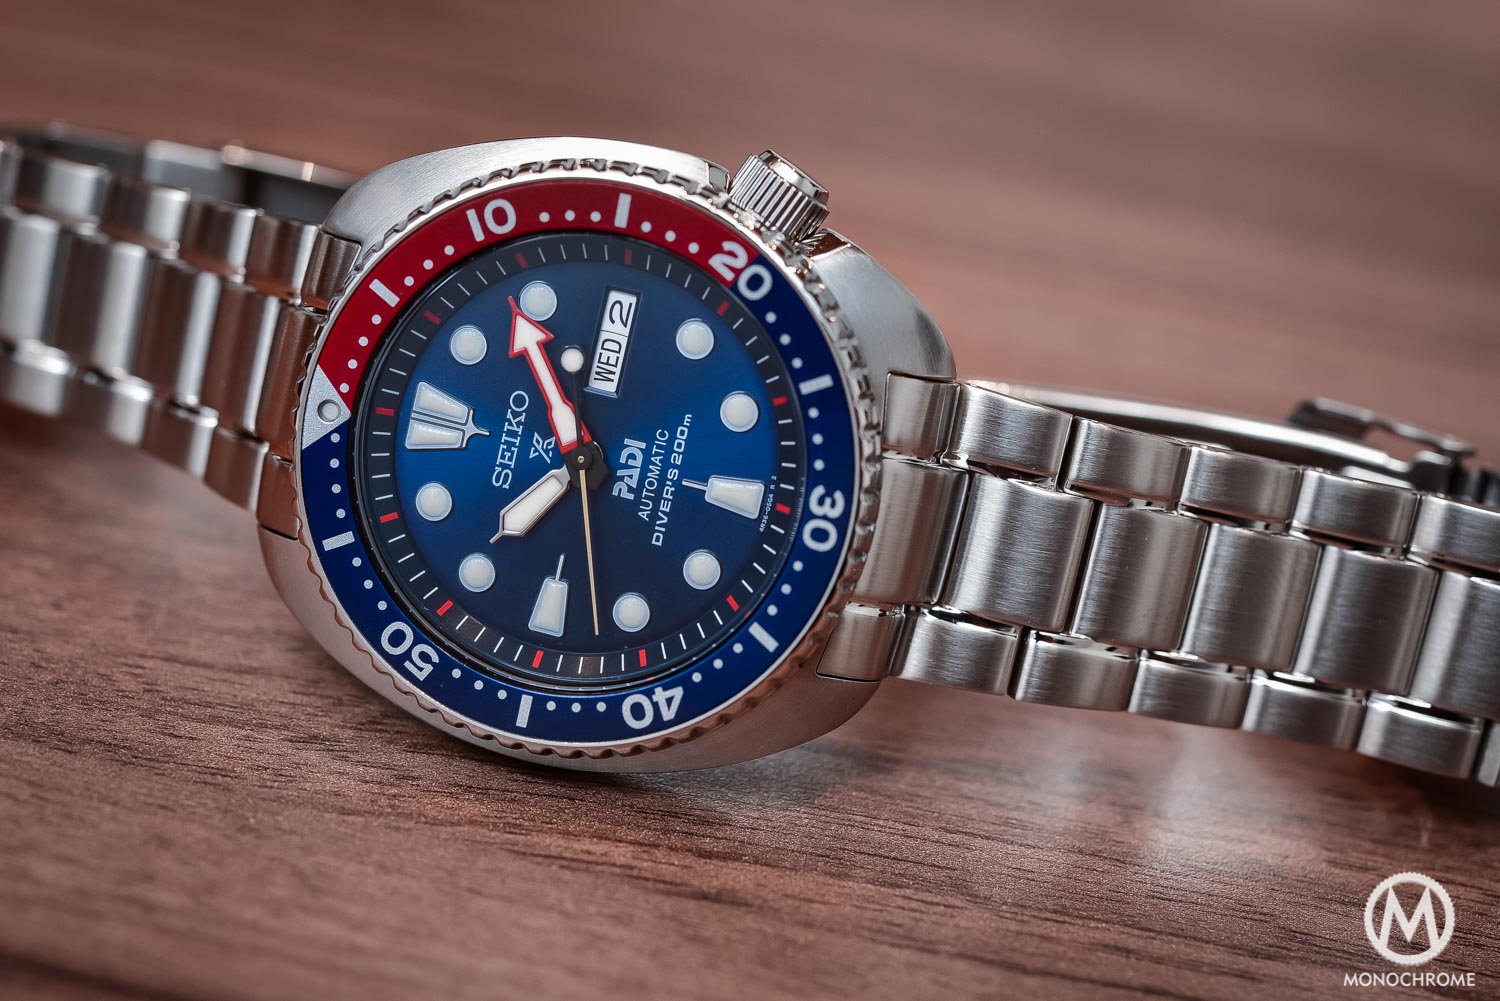 Hands-On Review - Seiko Prospex SRPA21 PADI Turtle - A nice, colorful ...